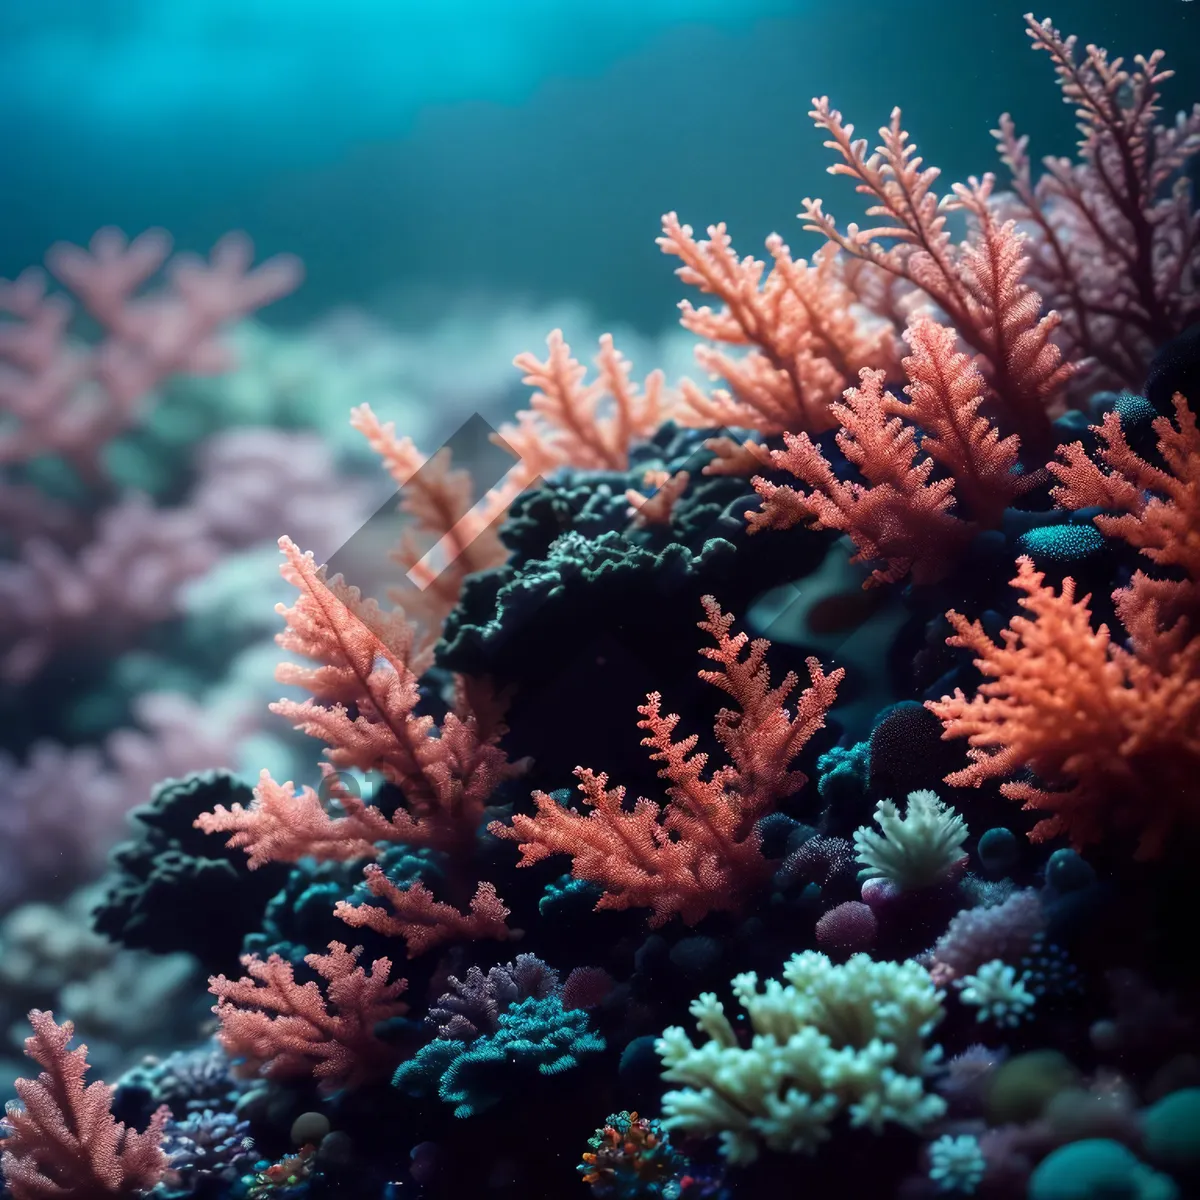 Picture of Colorful Coral Reef Bursting with Marine Life